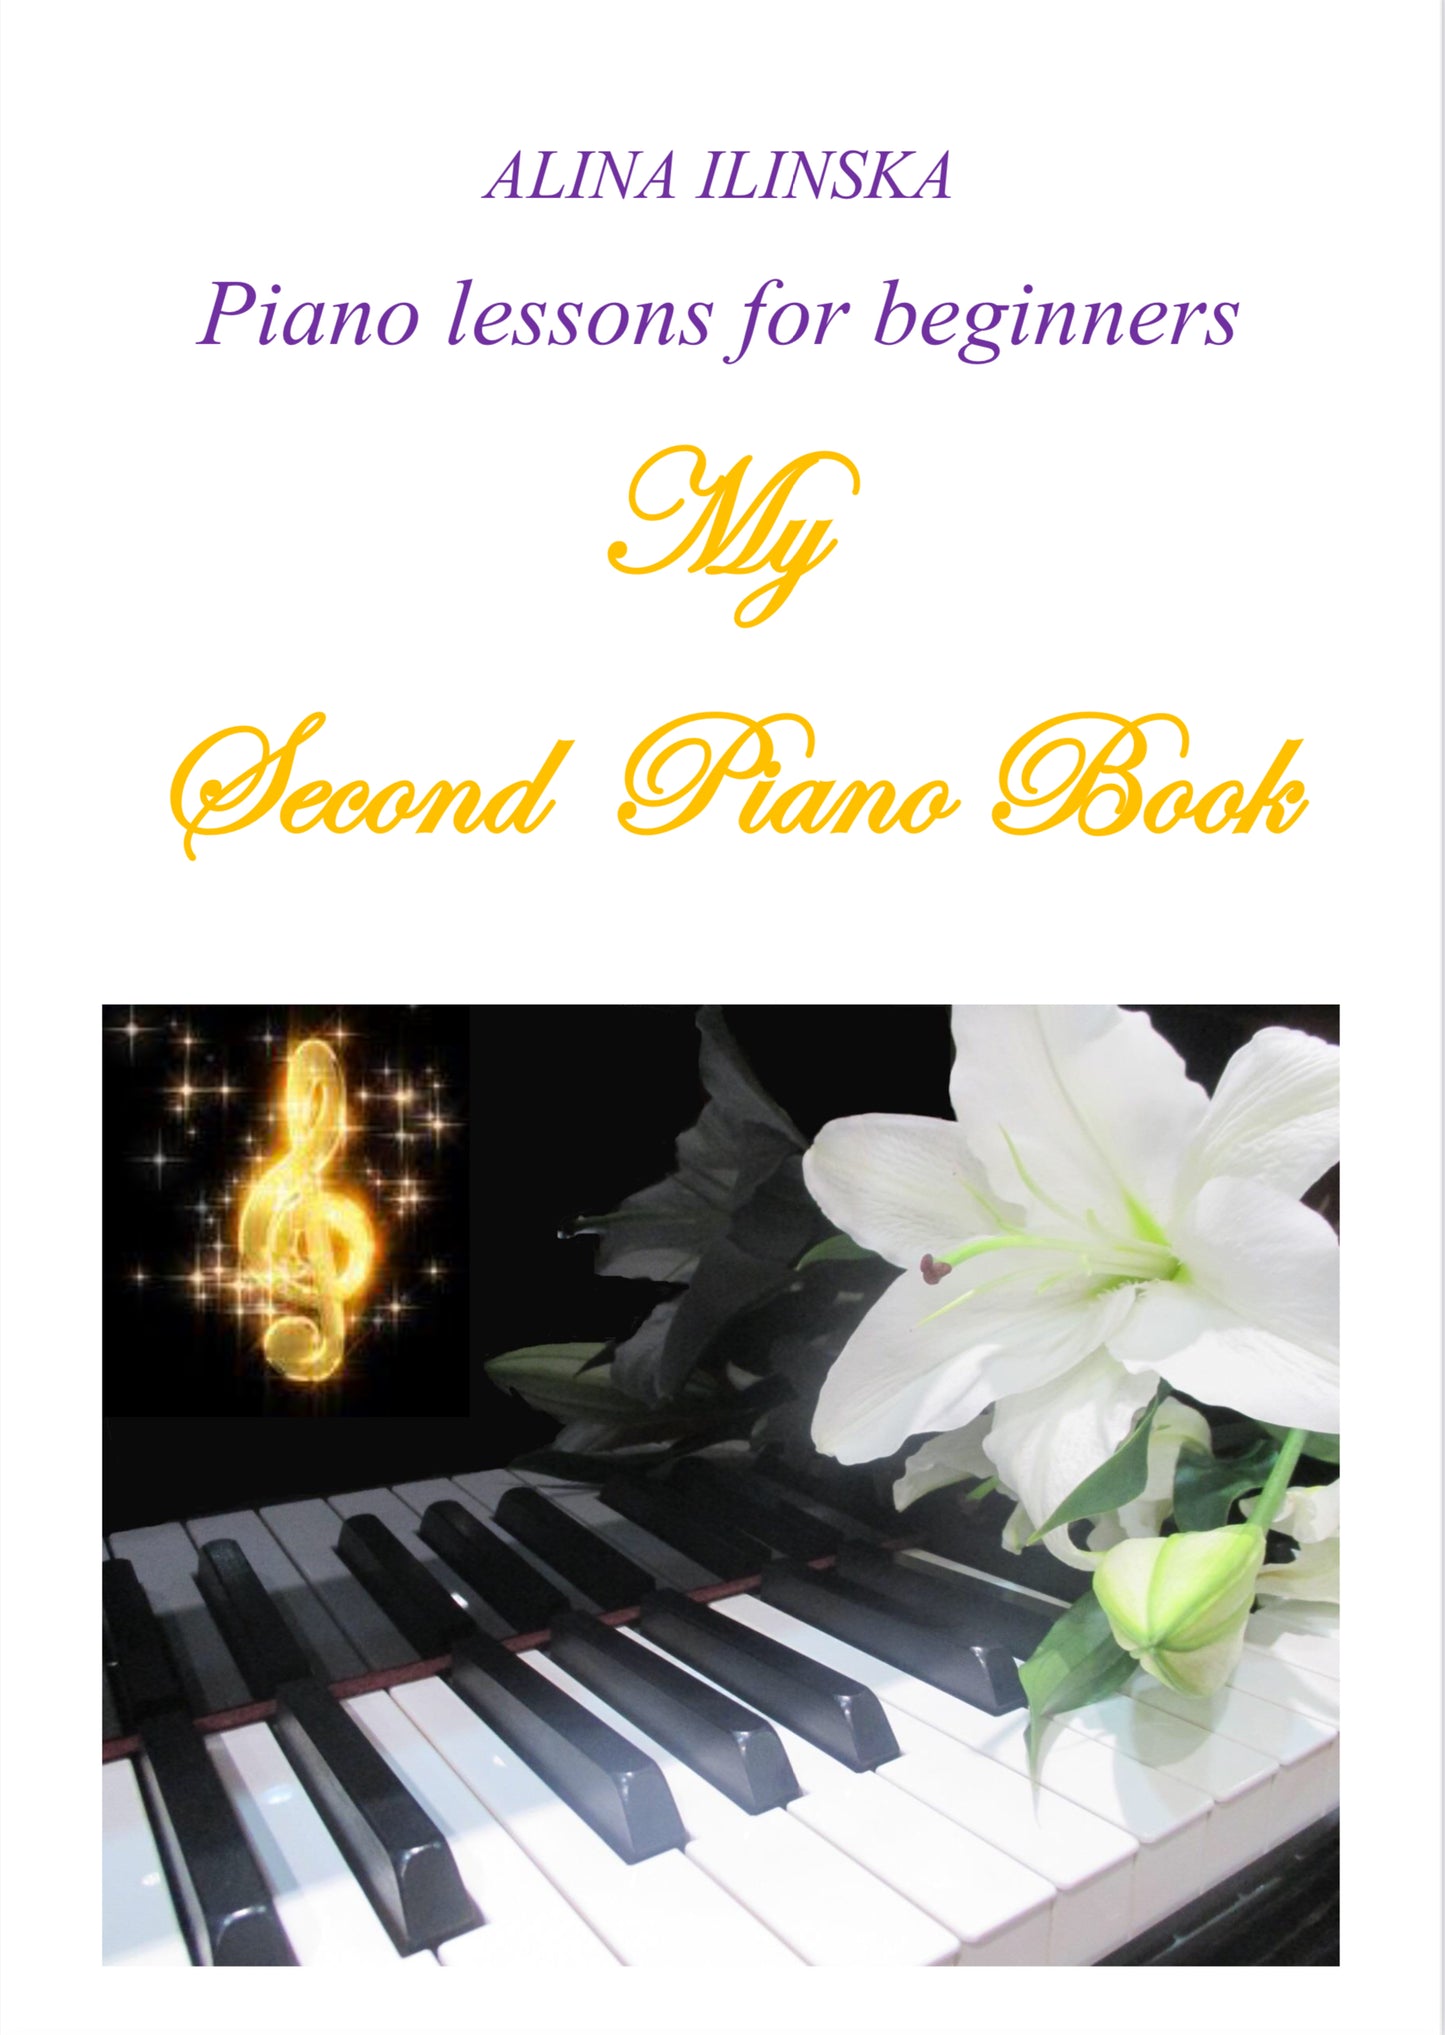 Piano lessons for beginners "My Second Piano Book"